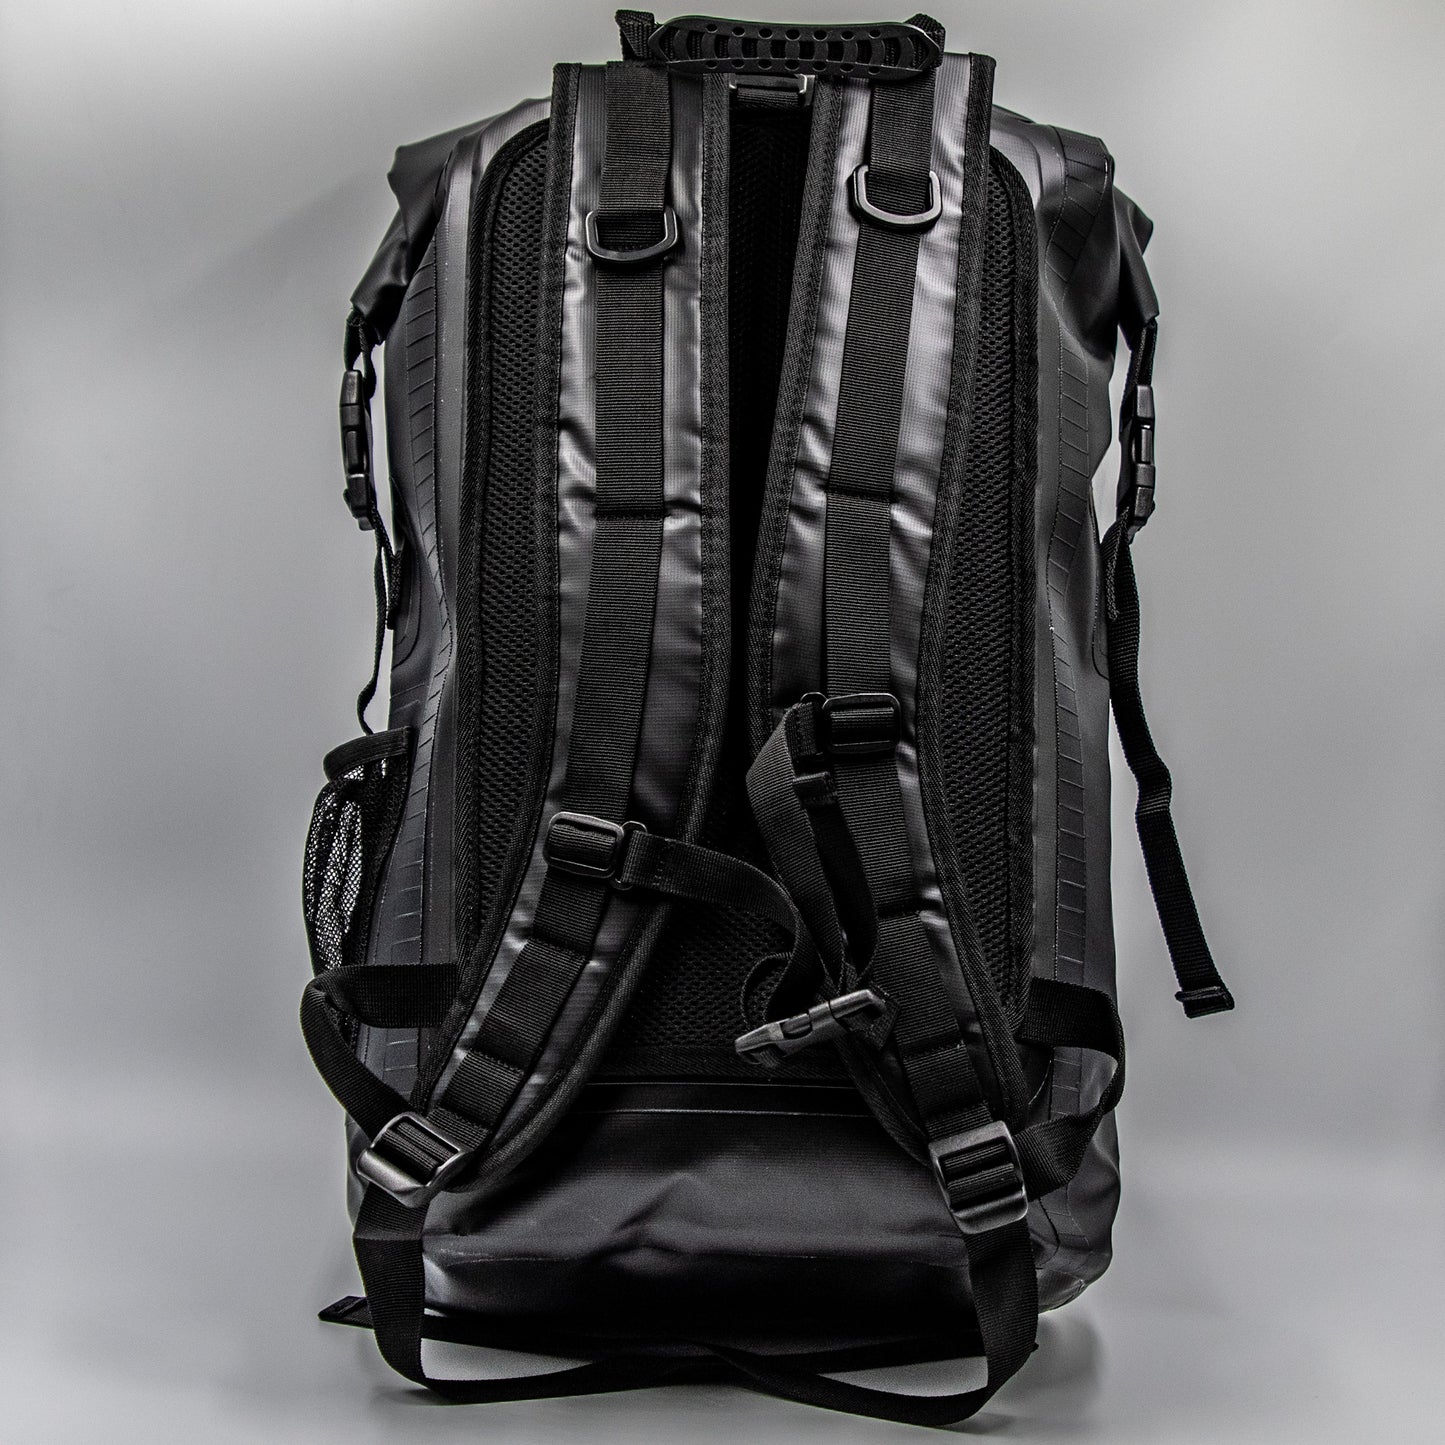 Shotty Gear Guard Dry Bag Backpack